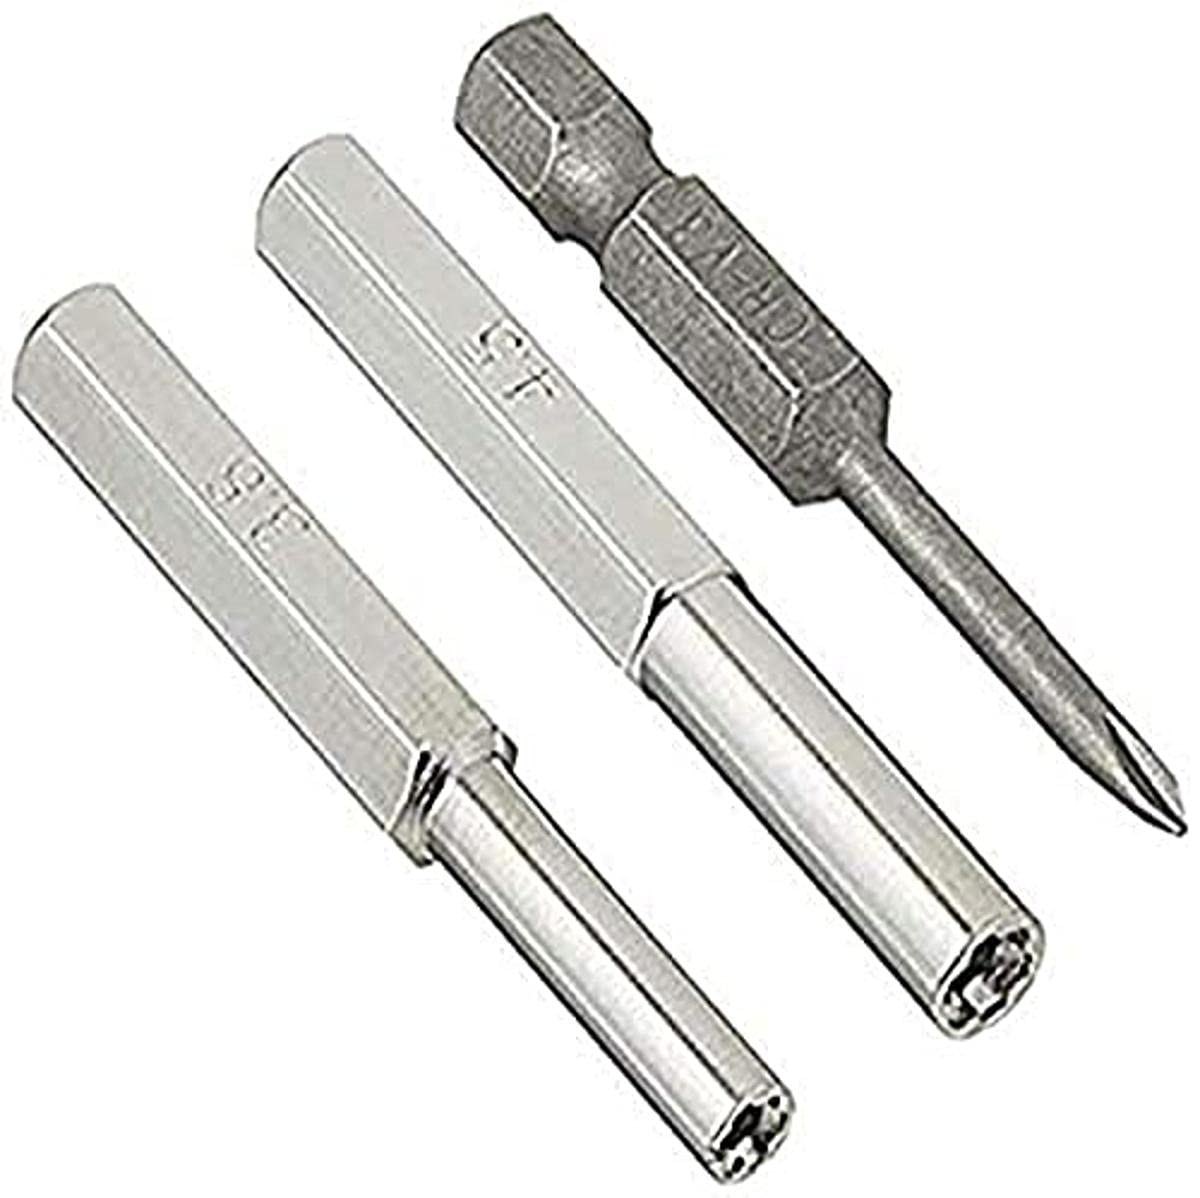 Silverhill Tools ATK252 3 Piece Security Bit Set for Nintendo Products: 3.8 mm & 4.5 mm Nut Setters plus Triwing